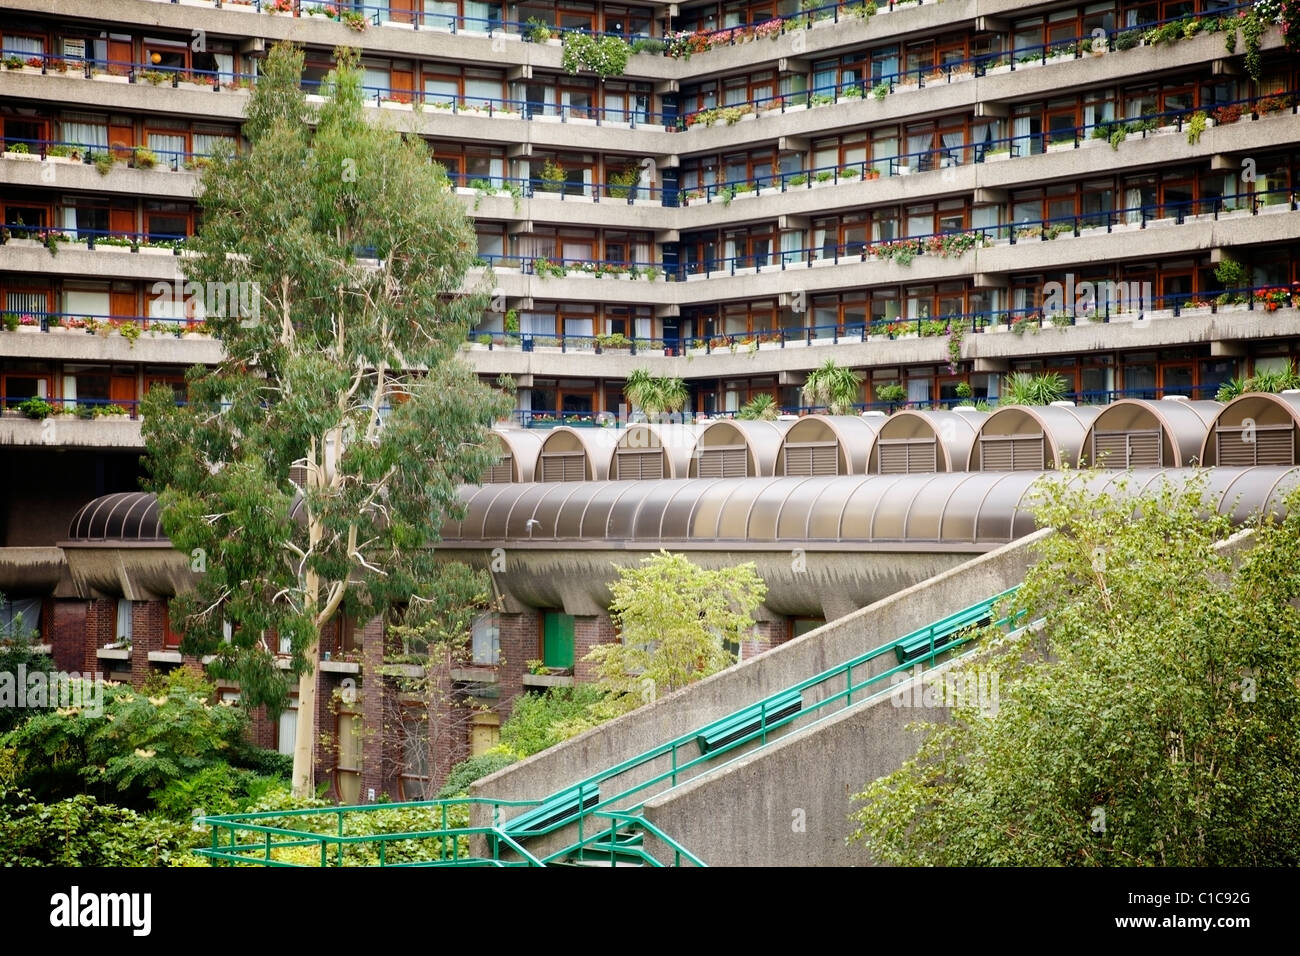 Residential apartments, Barbican Centre, London. Stock Photo